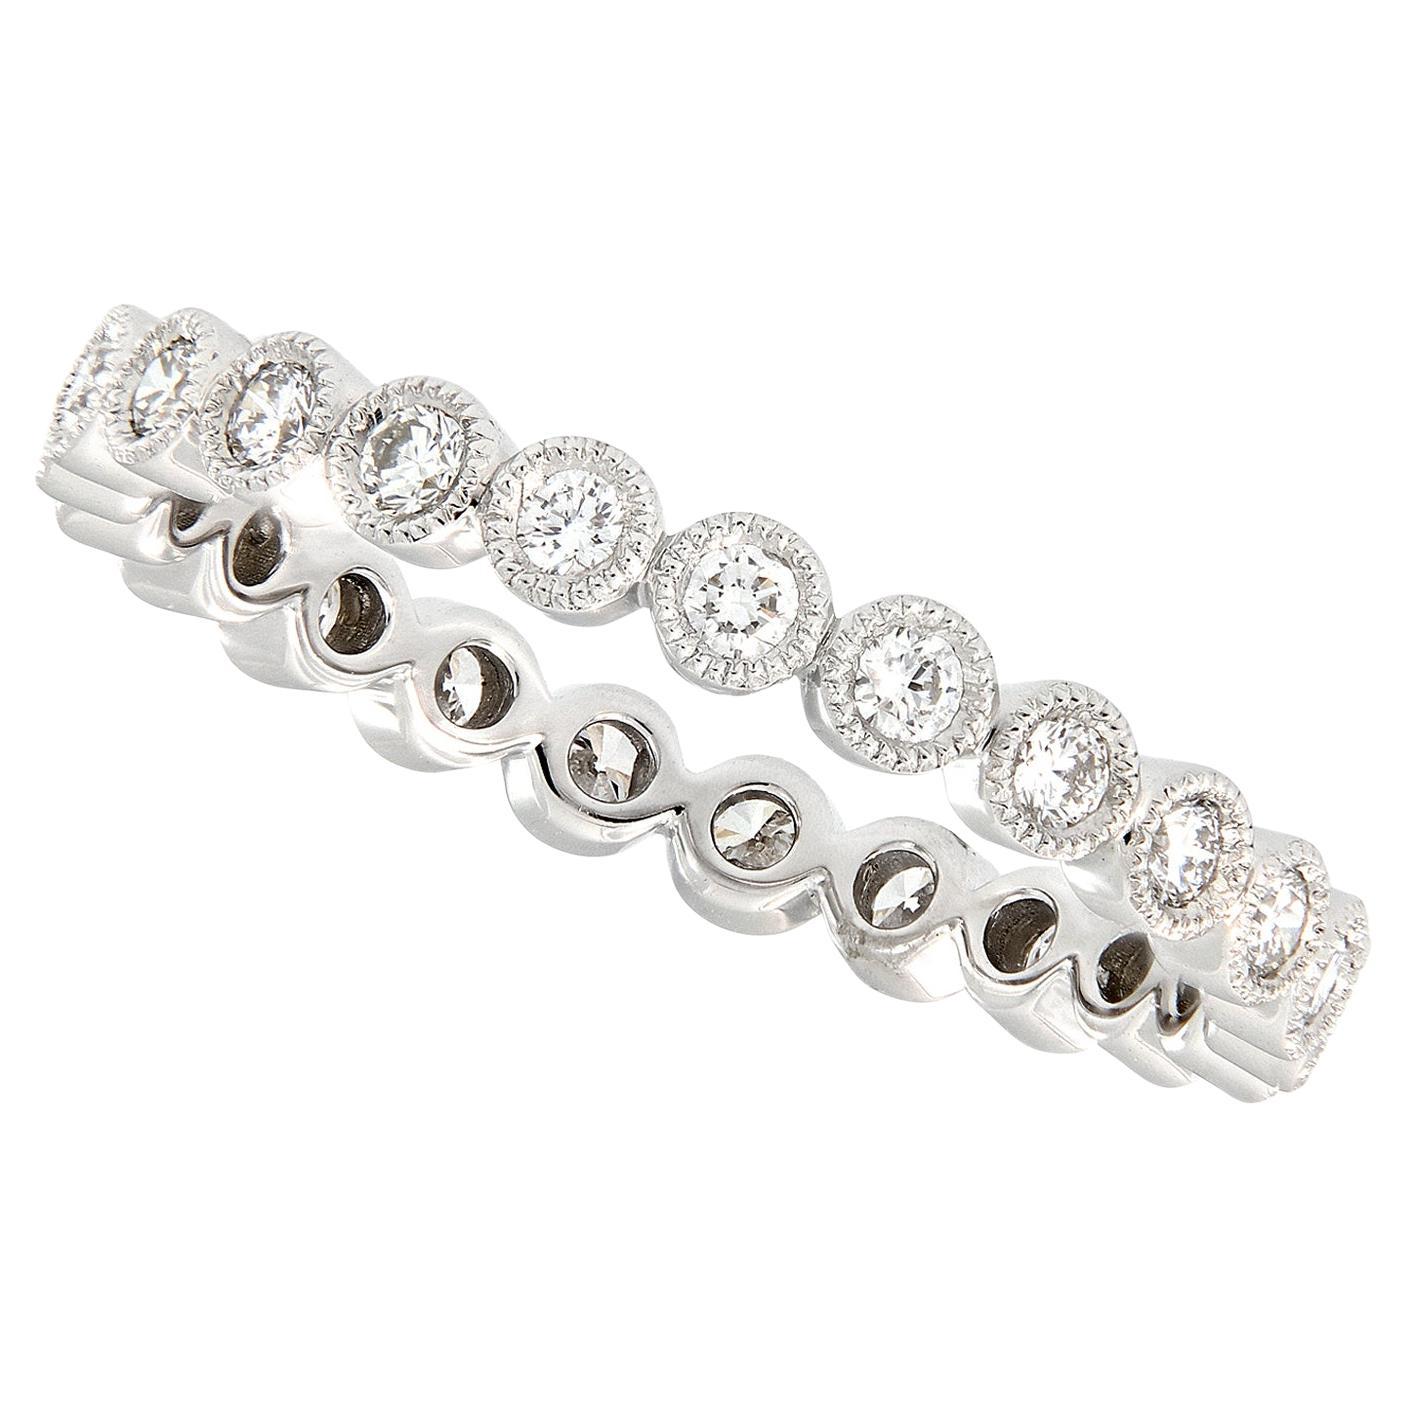 Created from bright 18 karat white gold, this beautiful eternity band boasts 23 fine round brilliant cut diamonds = 0.42 Cttw each individually set in milgrain edged bezels for a stunning look on its own or check out our white and rose gold matching